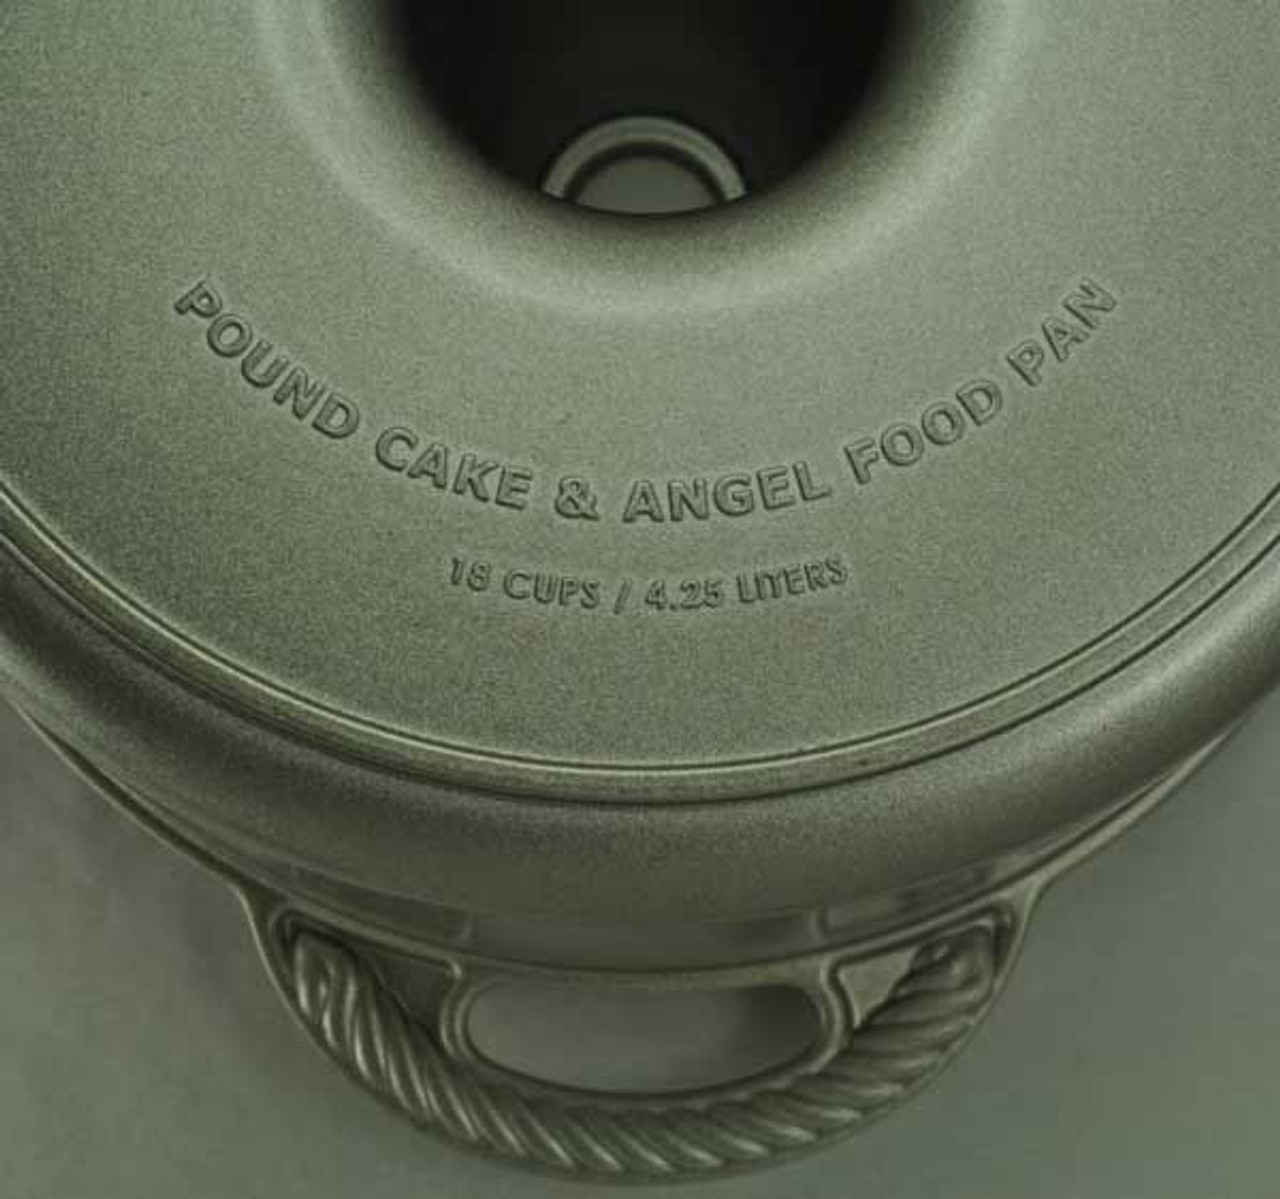 Nordic Ware Classic Cast Pound Cake and Angelfood Tube Pan, 18 Cup